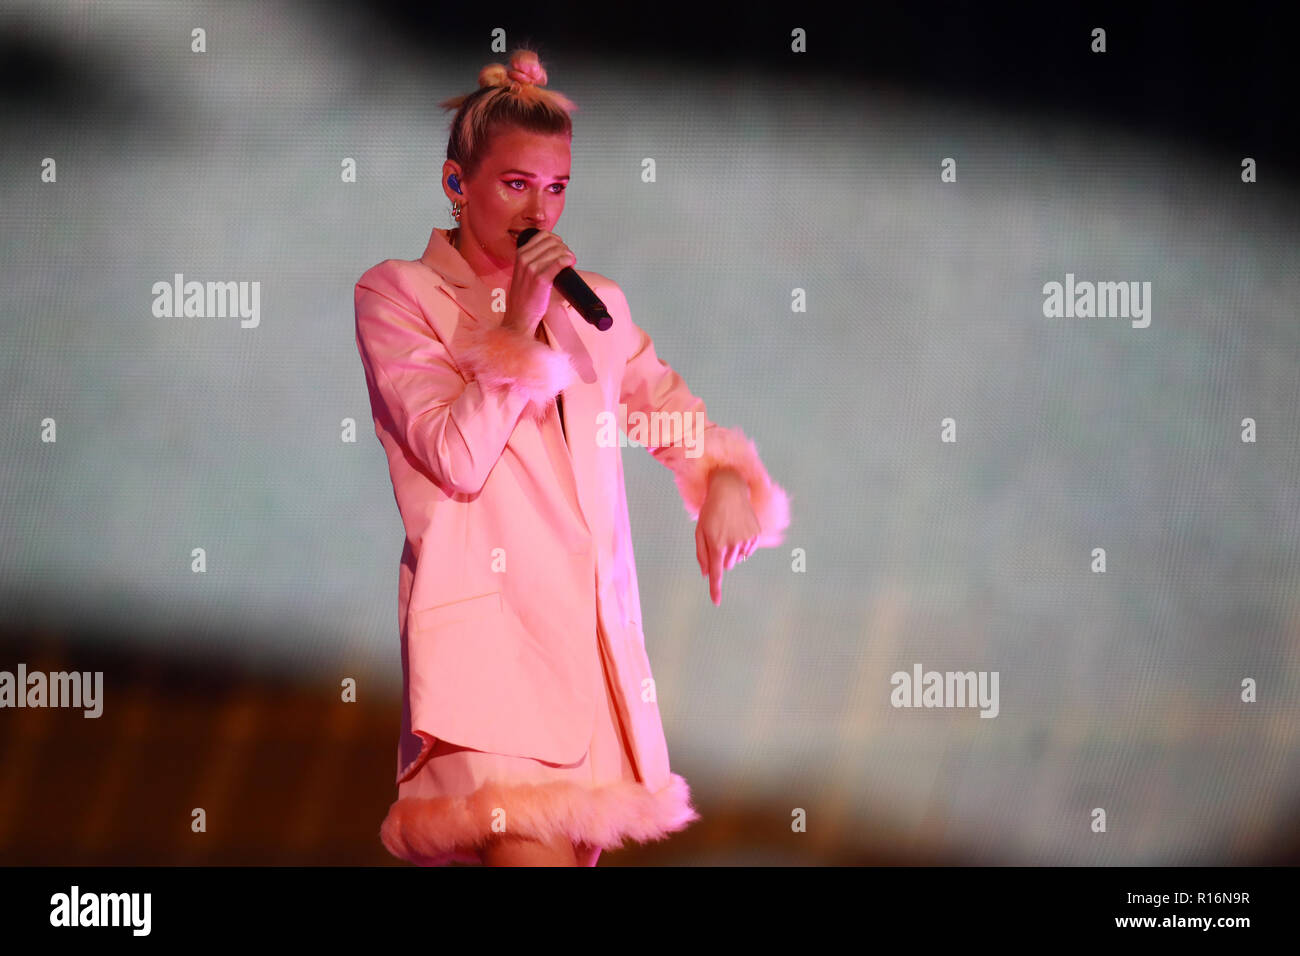 Auckland, New Zeland. 9th November 2018. AUCKLAND, NEW ZEALAND - NOVEMBER 09: Georgia Nott of Broods performs at Mt Smart Stadium on November 9, 2018 in Auckland, New Zealand. Photo: Norrie Montgomery/imageSPACE/MediaPunch Credit: MediaPunch Inc/Alamy Live News Stock Photo